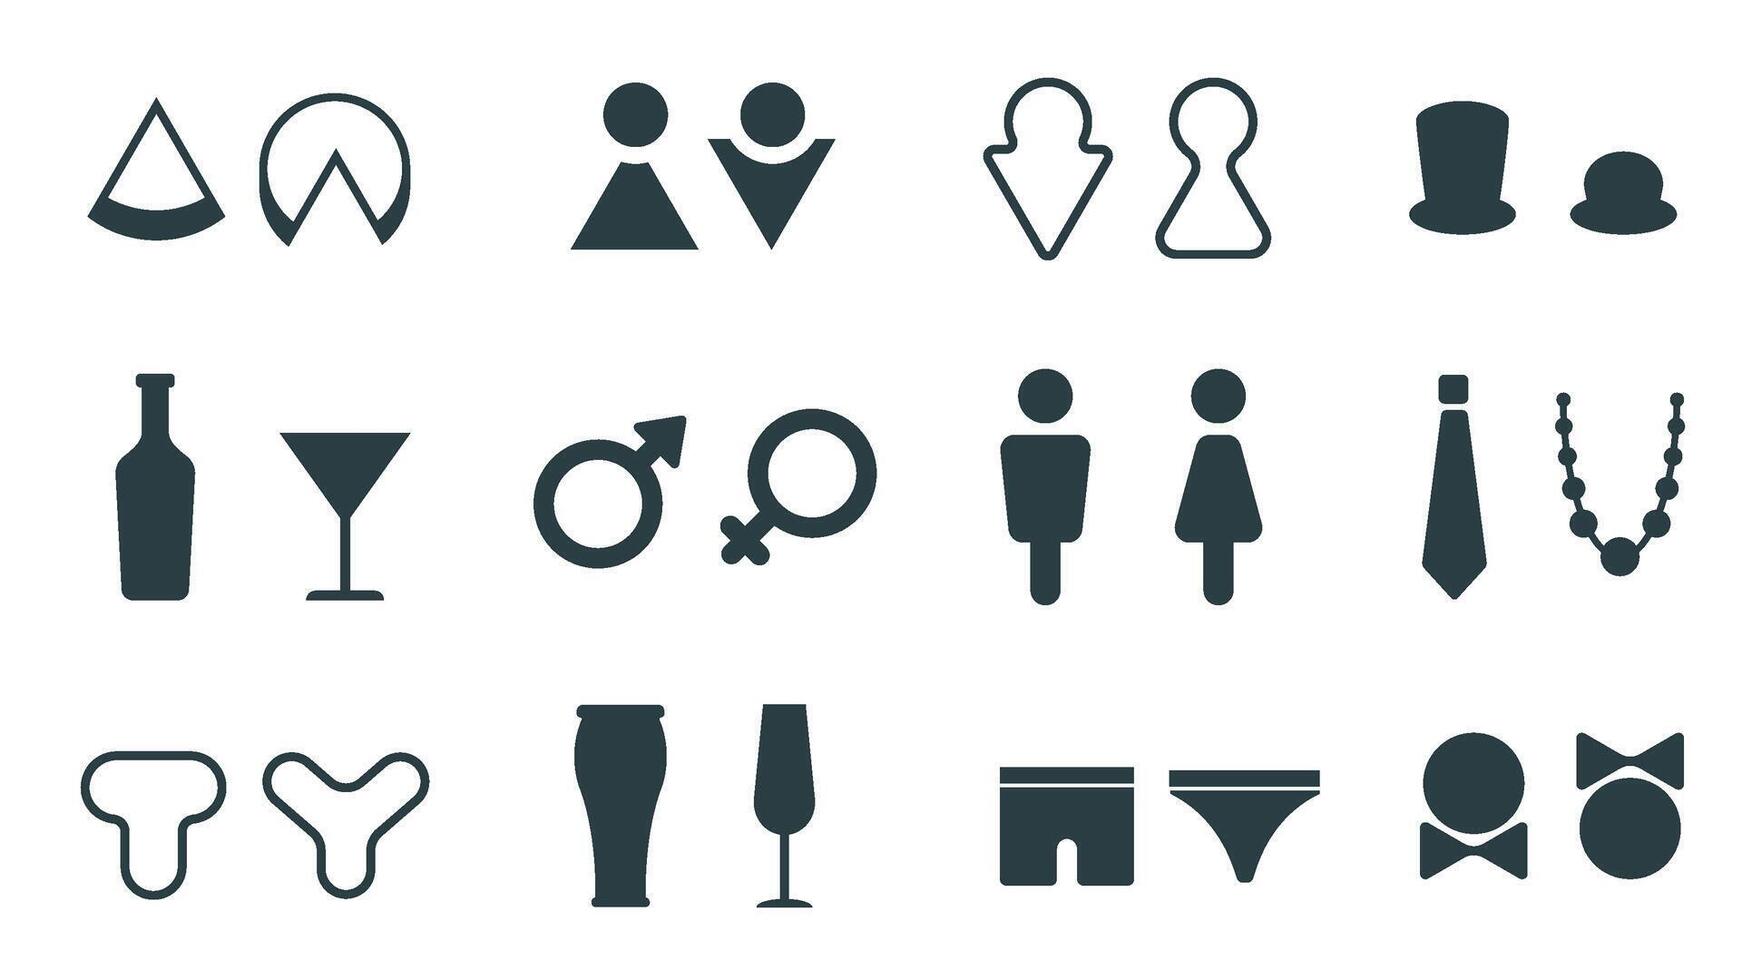 Funny wc signs for men and women, toilet or restroom icons. Male and female bathroom door gender pictogram for cafe or restaurant vector set